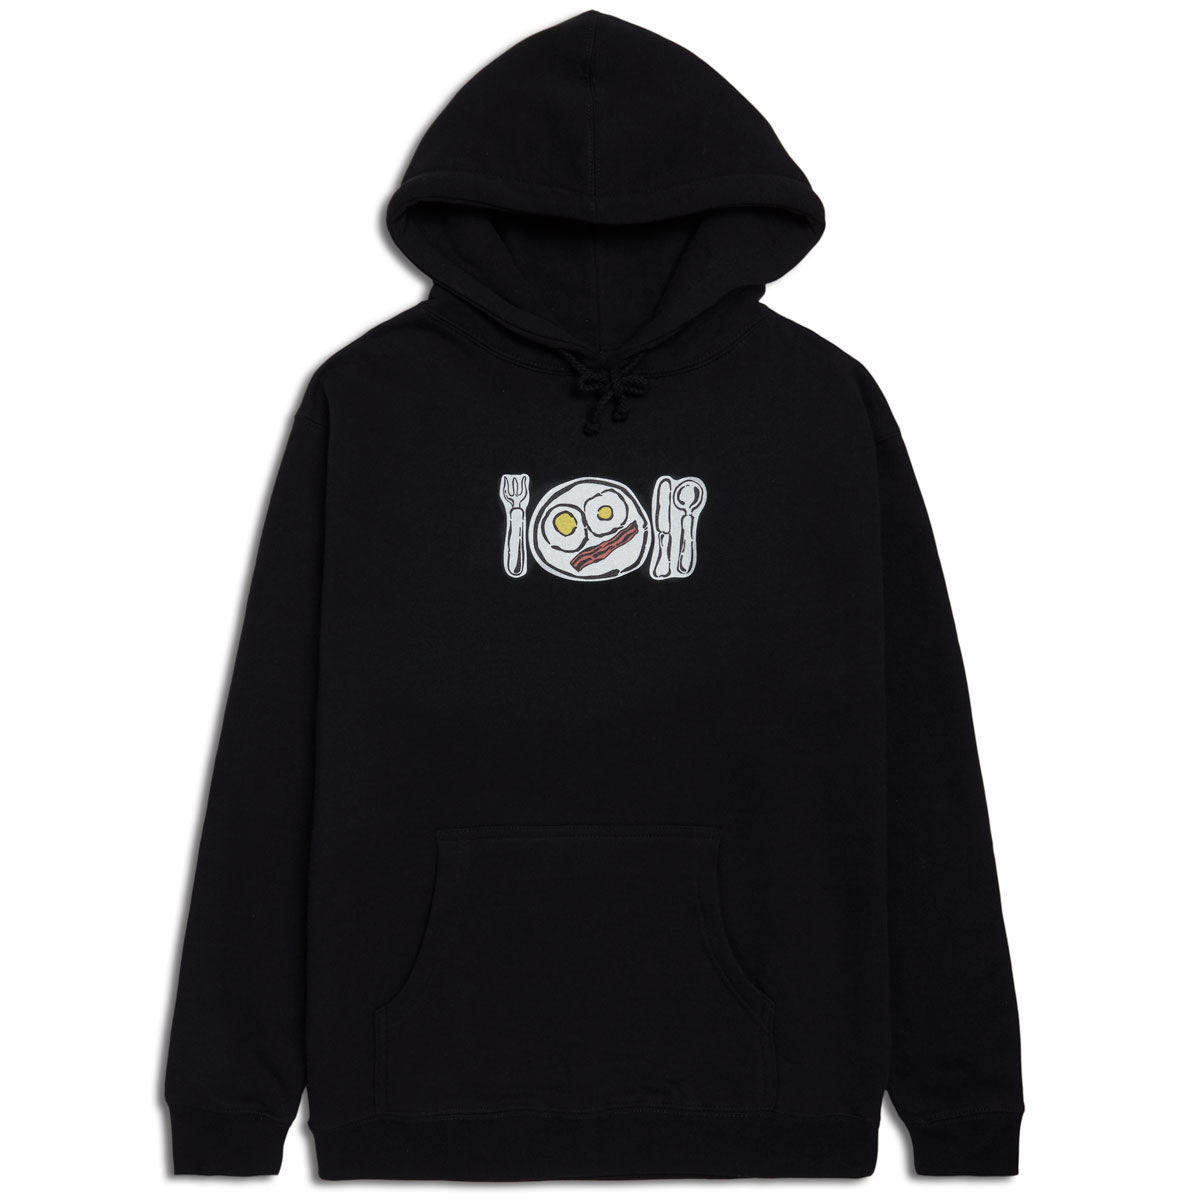 CCS Over Easy Hoodie - Black - XL image 1